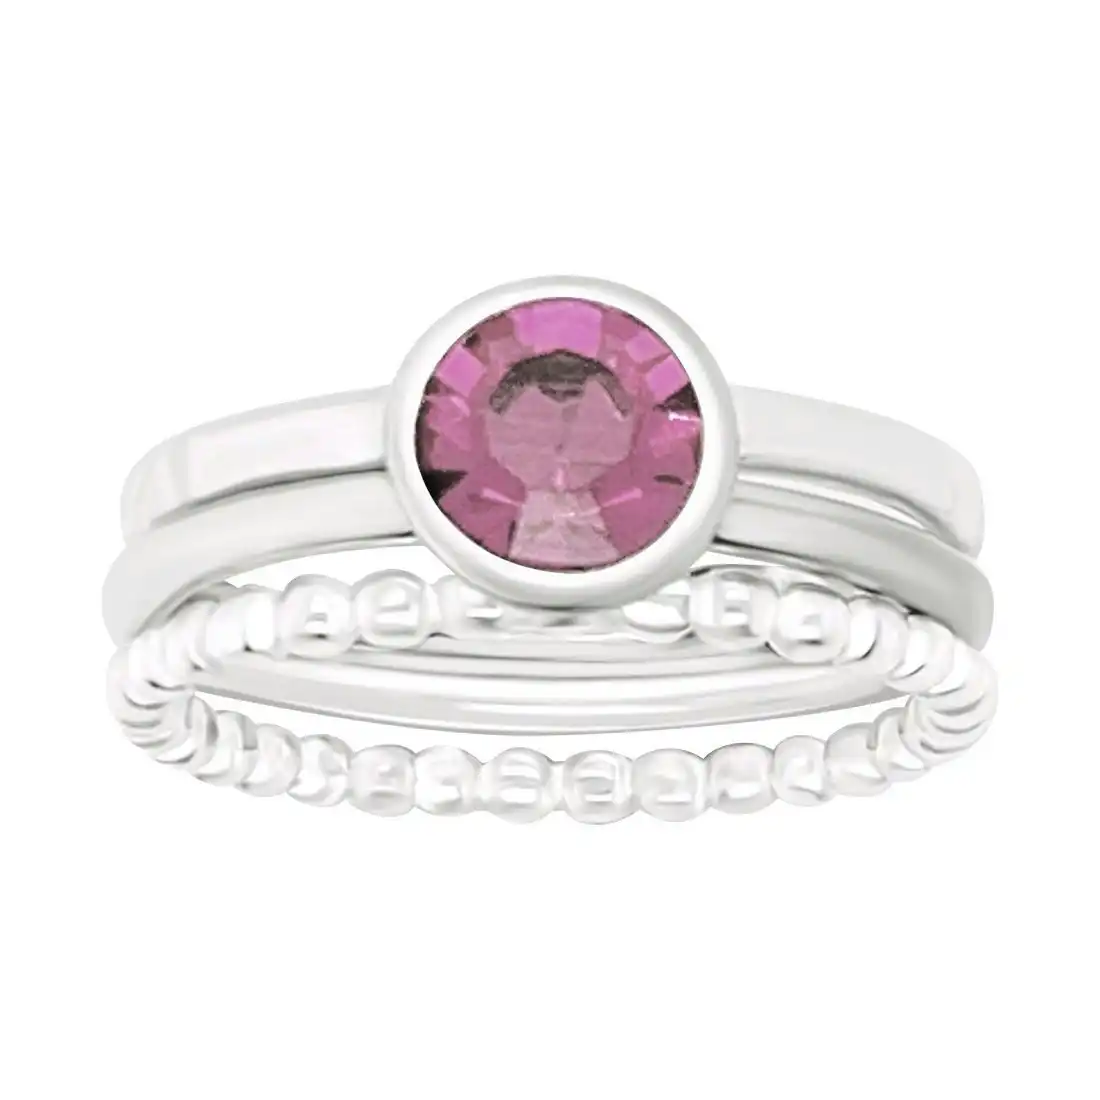 Sterling Silver 3 Band Ring with Pink Cubic Zirconia